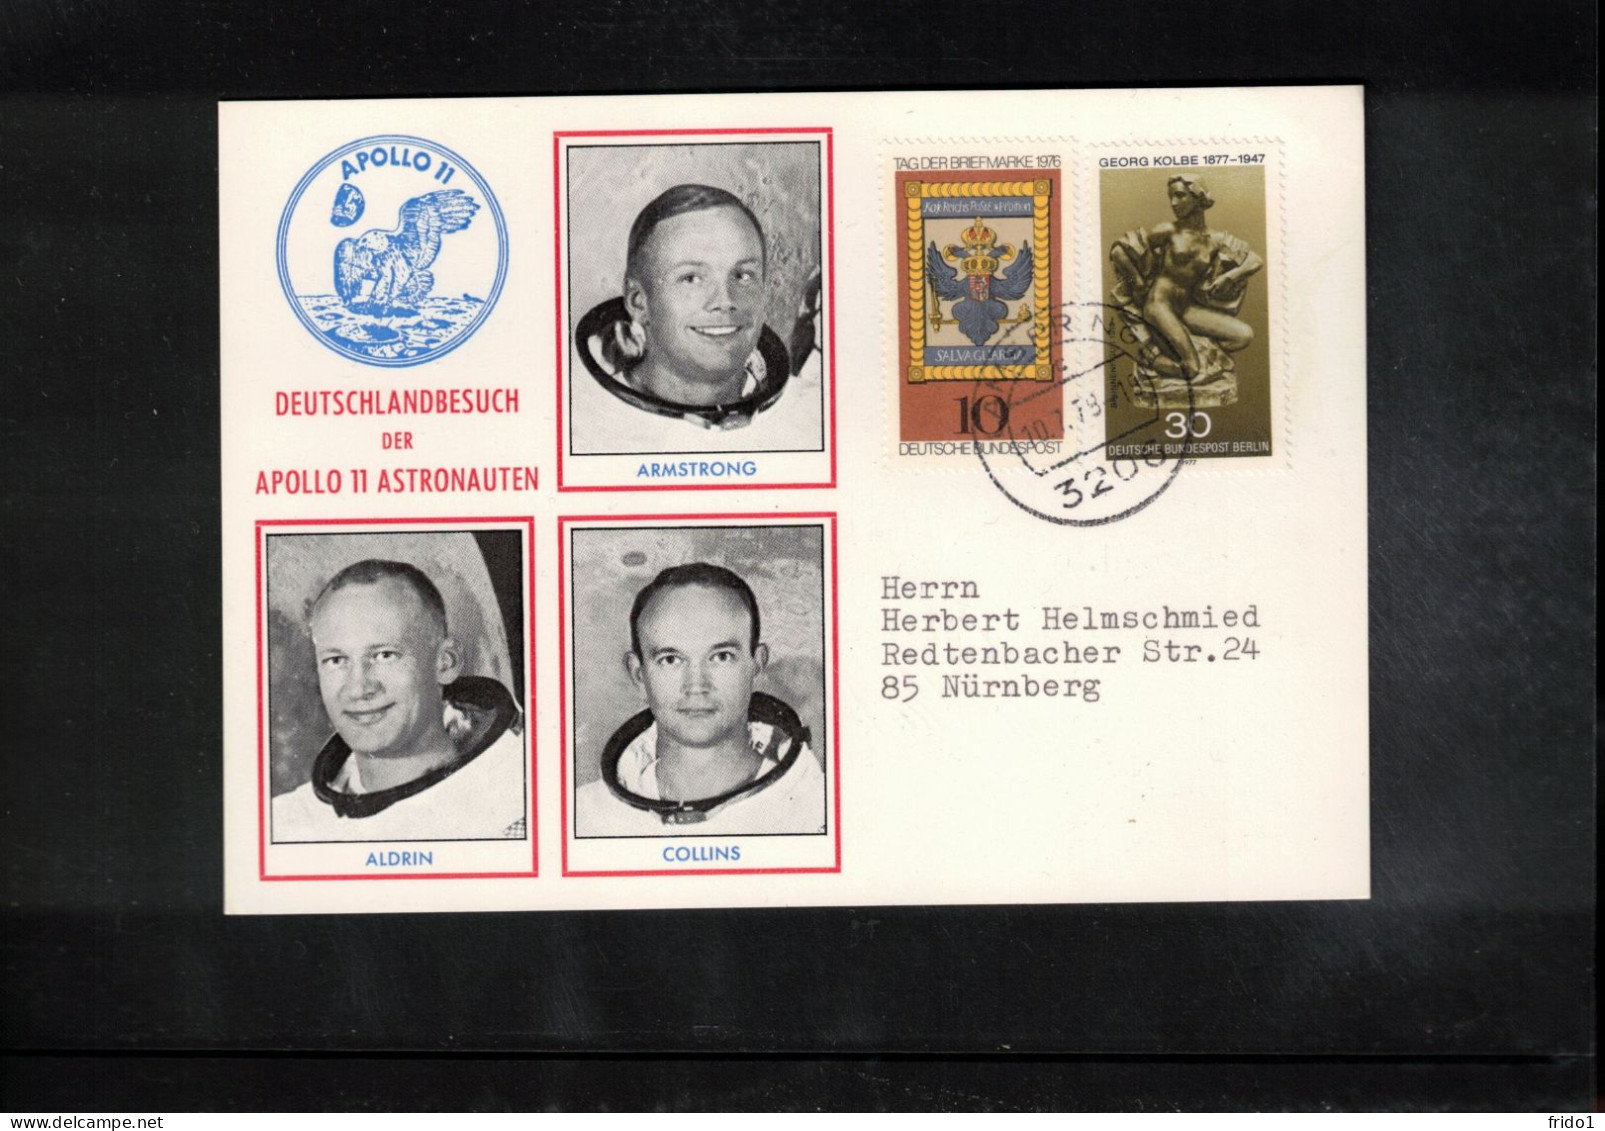 Germany 1978 Space / Weltraum Apollo 11 Visit Of Astronauts In Germany Interesting Postcard - Europe